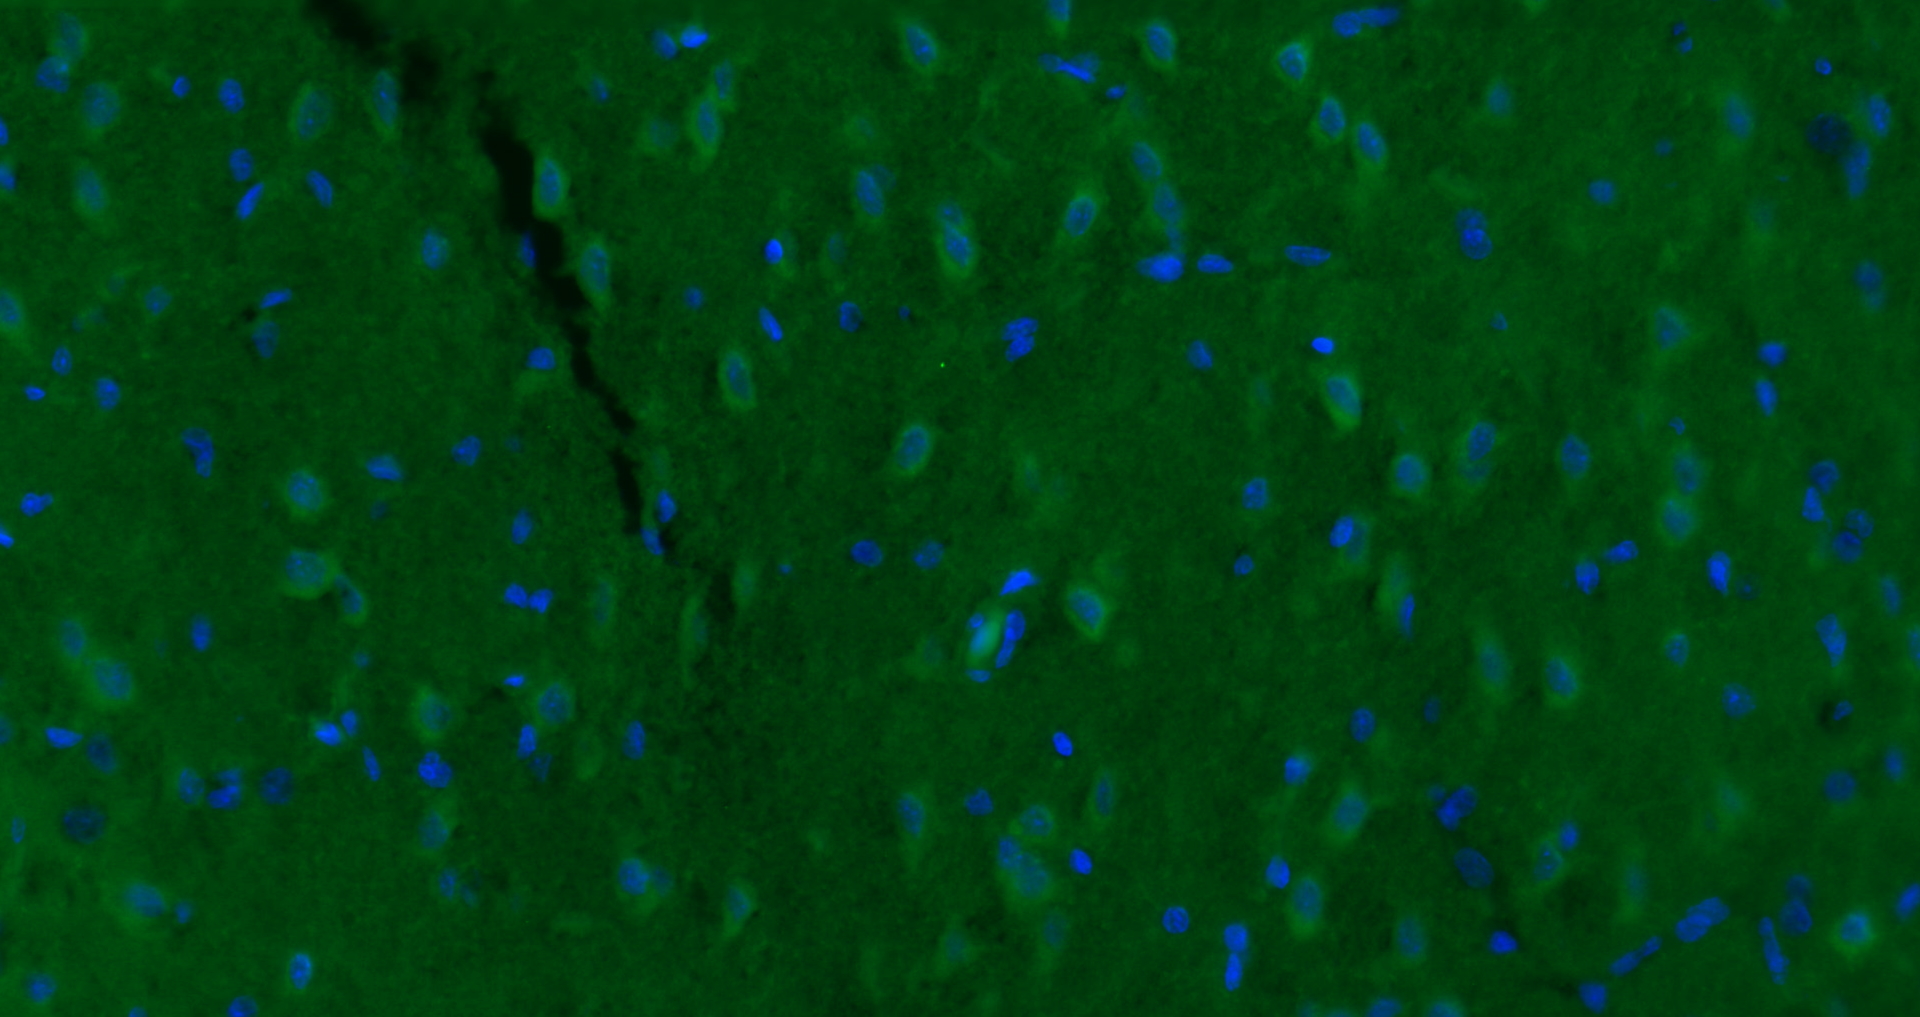 Paraformaldehyde-fixed, paraffin embedded (rat brain); Antigen retrieval by boiling in sodium citrate buffer (pH6.0) for 15min; Blocking buffer (normal goat serum) at 37°C for 30min; Antibody incubation with (KCNG3) Polyclonal Antibody, Unconjugated (bs-12175R) at 1:200 overnight at 4°C, followed by a conjugated Goat Anti-Rabbit IgG antibody (bs-0295G-AF488) for 90 minutes, and DAPI for nuclei staining.